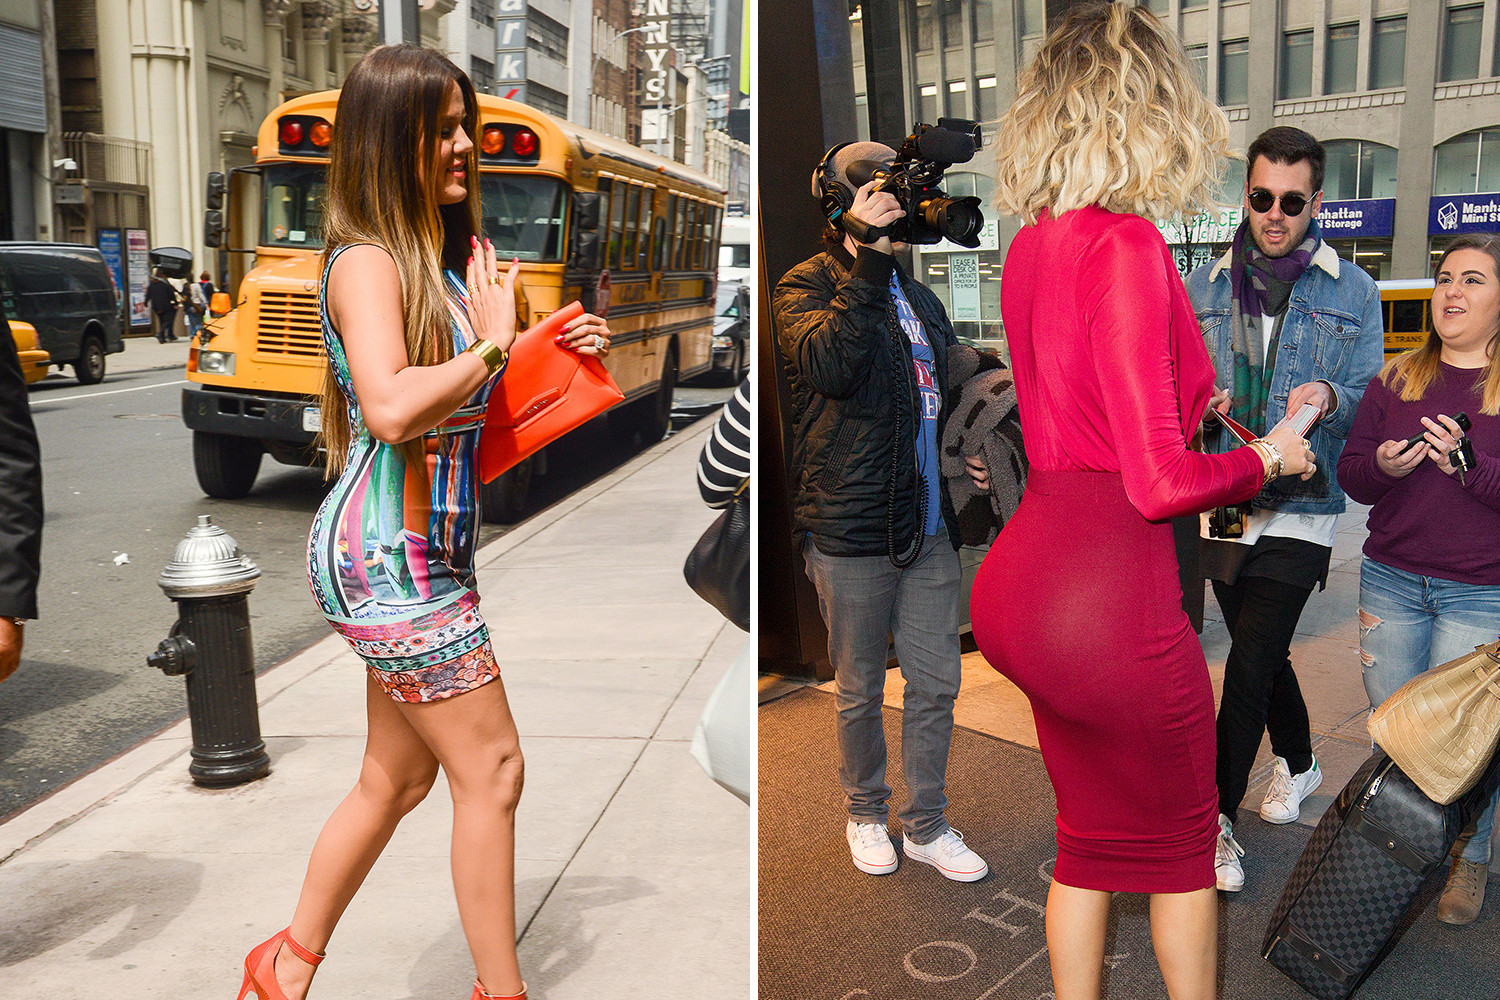 Exercise or implants? Just how did Khloe Kardashian get her ...